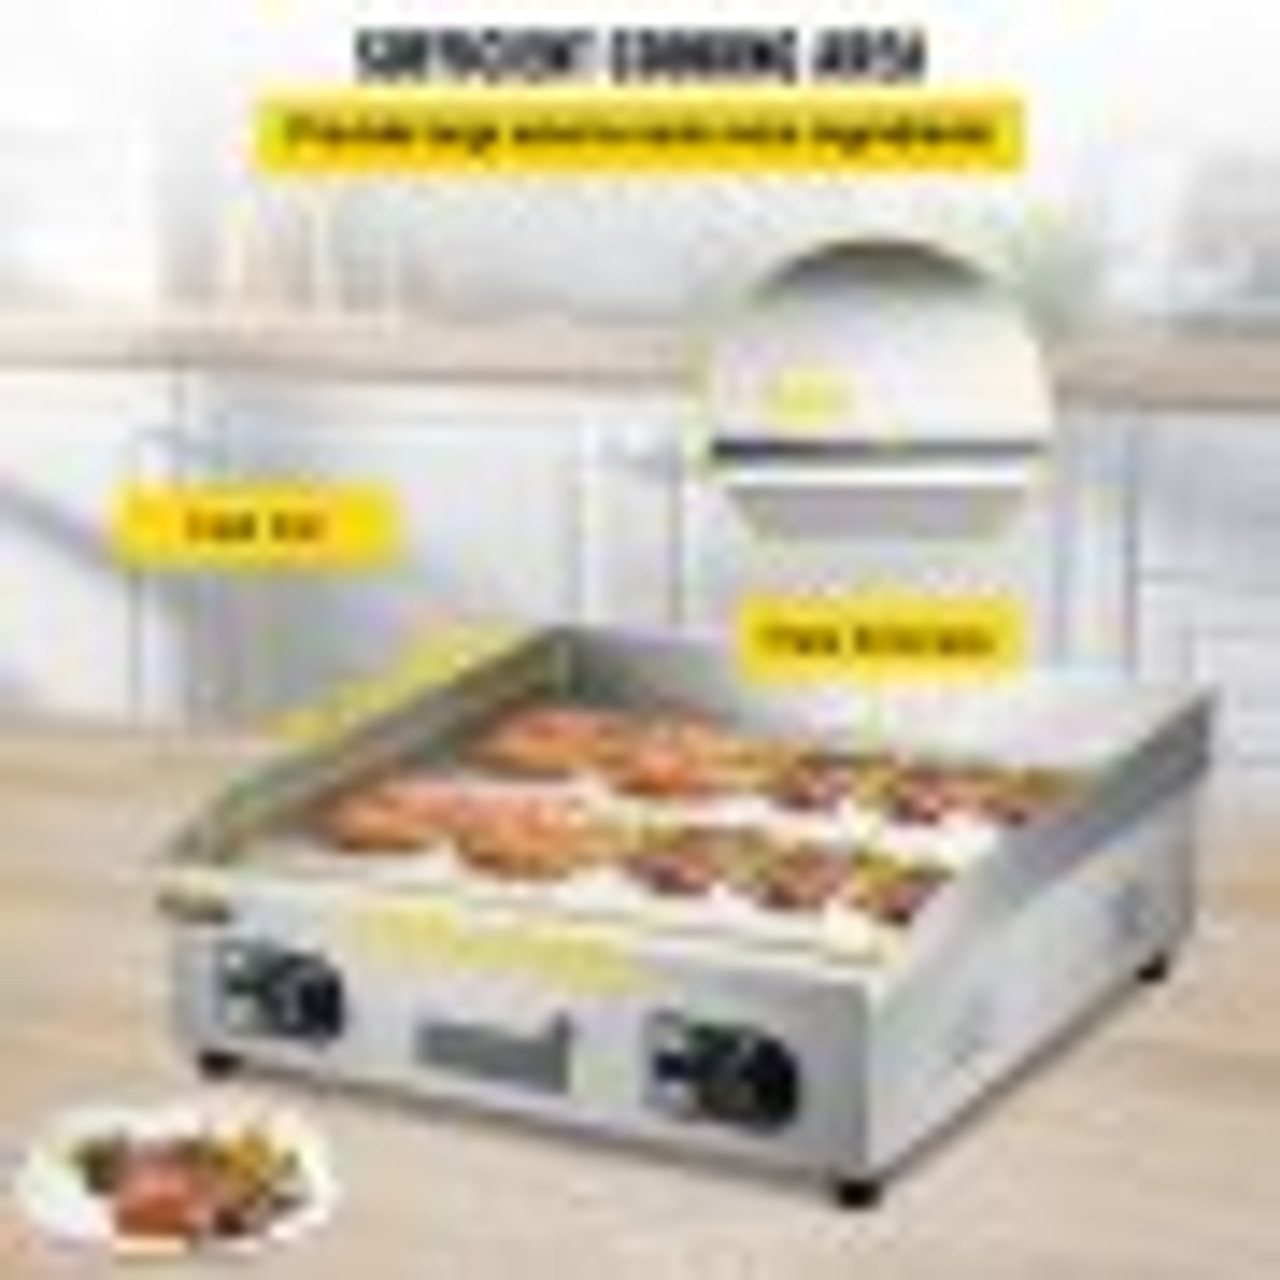 29" Commercial Electric Griddle 110V 3000W Electric Countertop Griddle Non-Stick Restaurant Teppanyaki Flat Top Grill Stainless Steel Adjustable Temperature Control 122øF-572øF (NO PLUG)